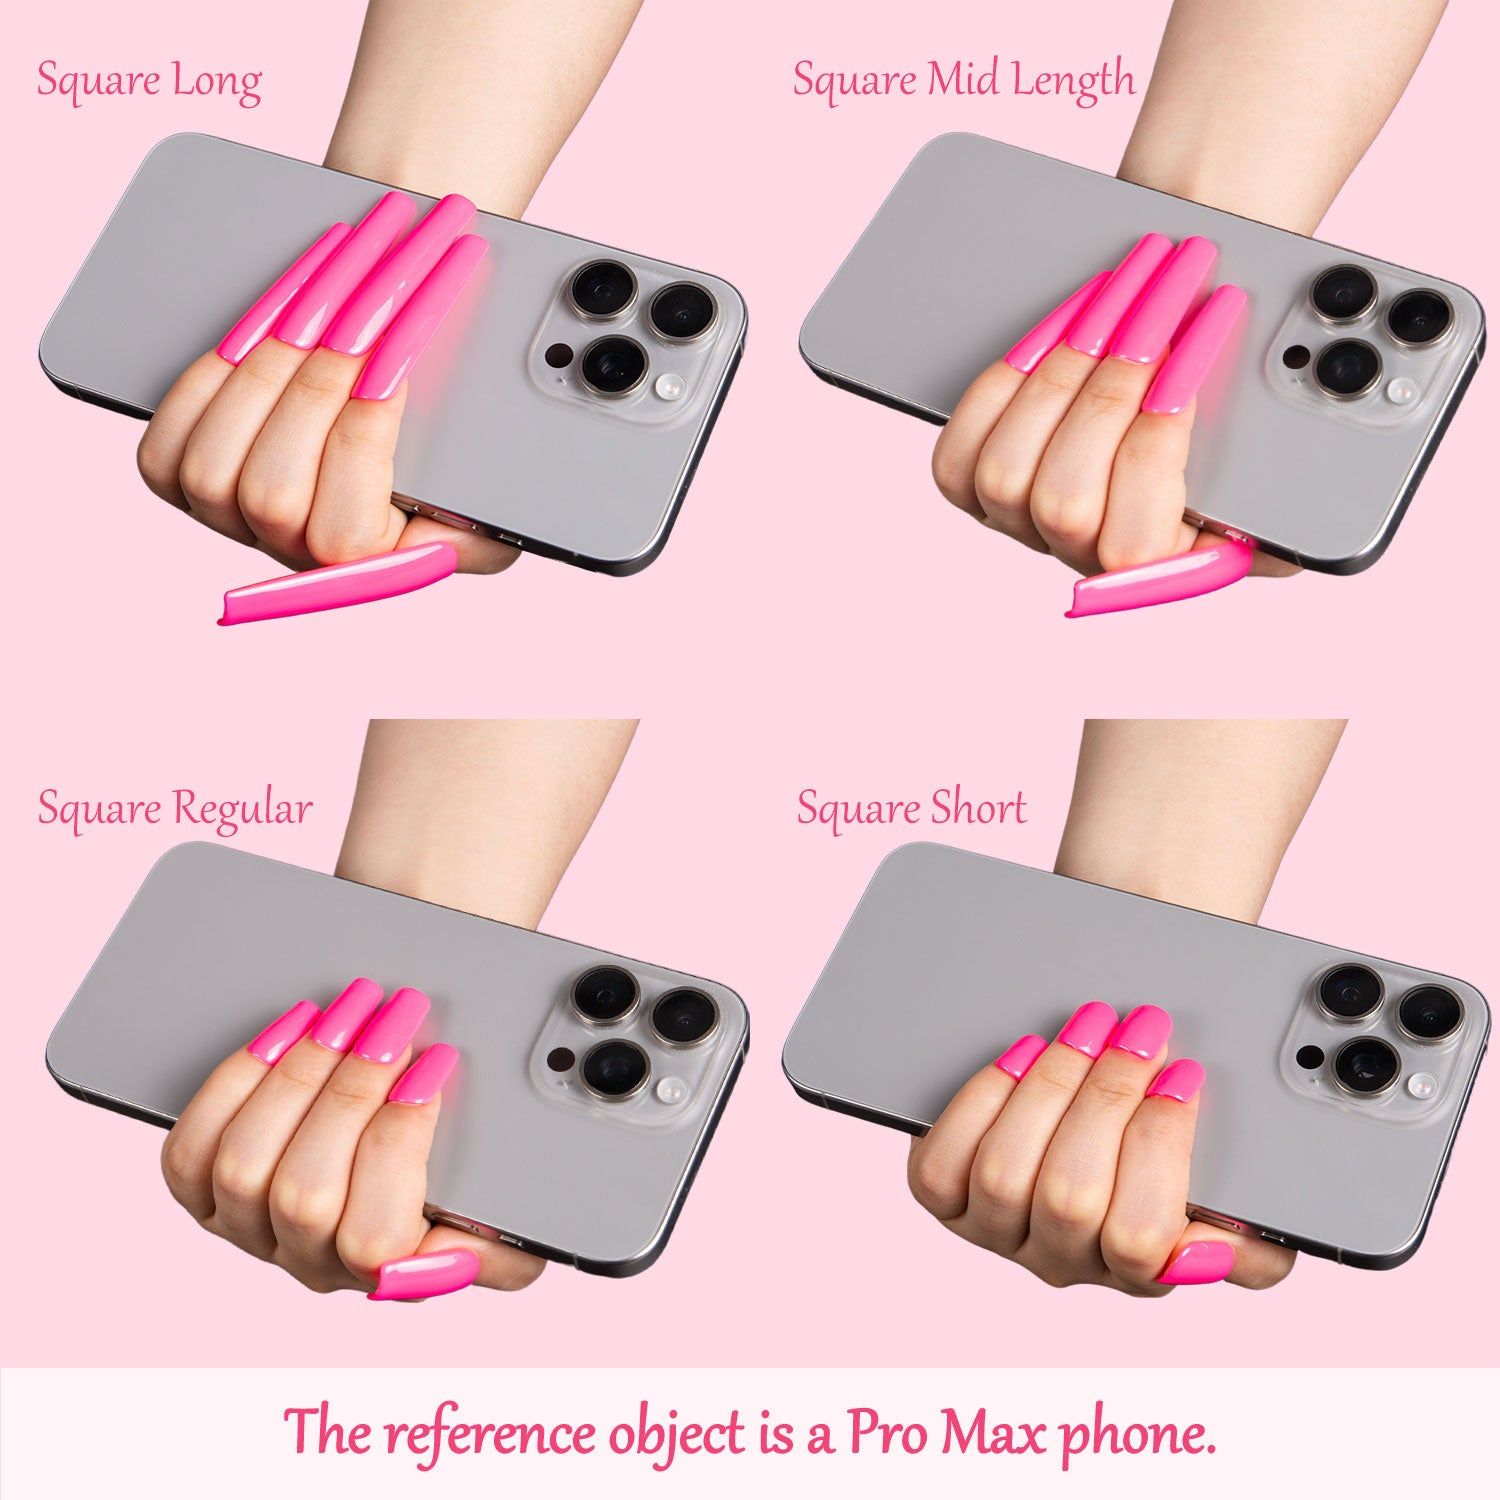 Four hands modeling bright pink square press-on nails in various lengths (Square Long, Square Mid Length, Square Regular, and Square Short) while holding a Pro Max phone for size reference.